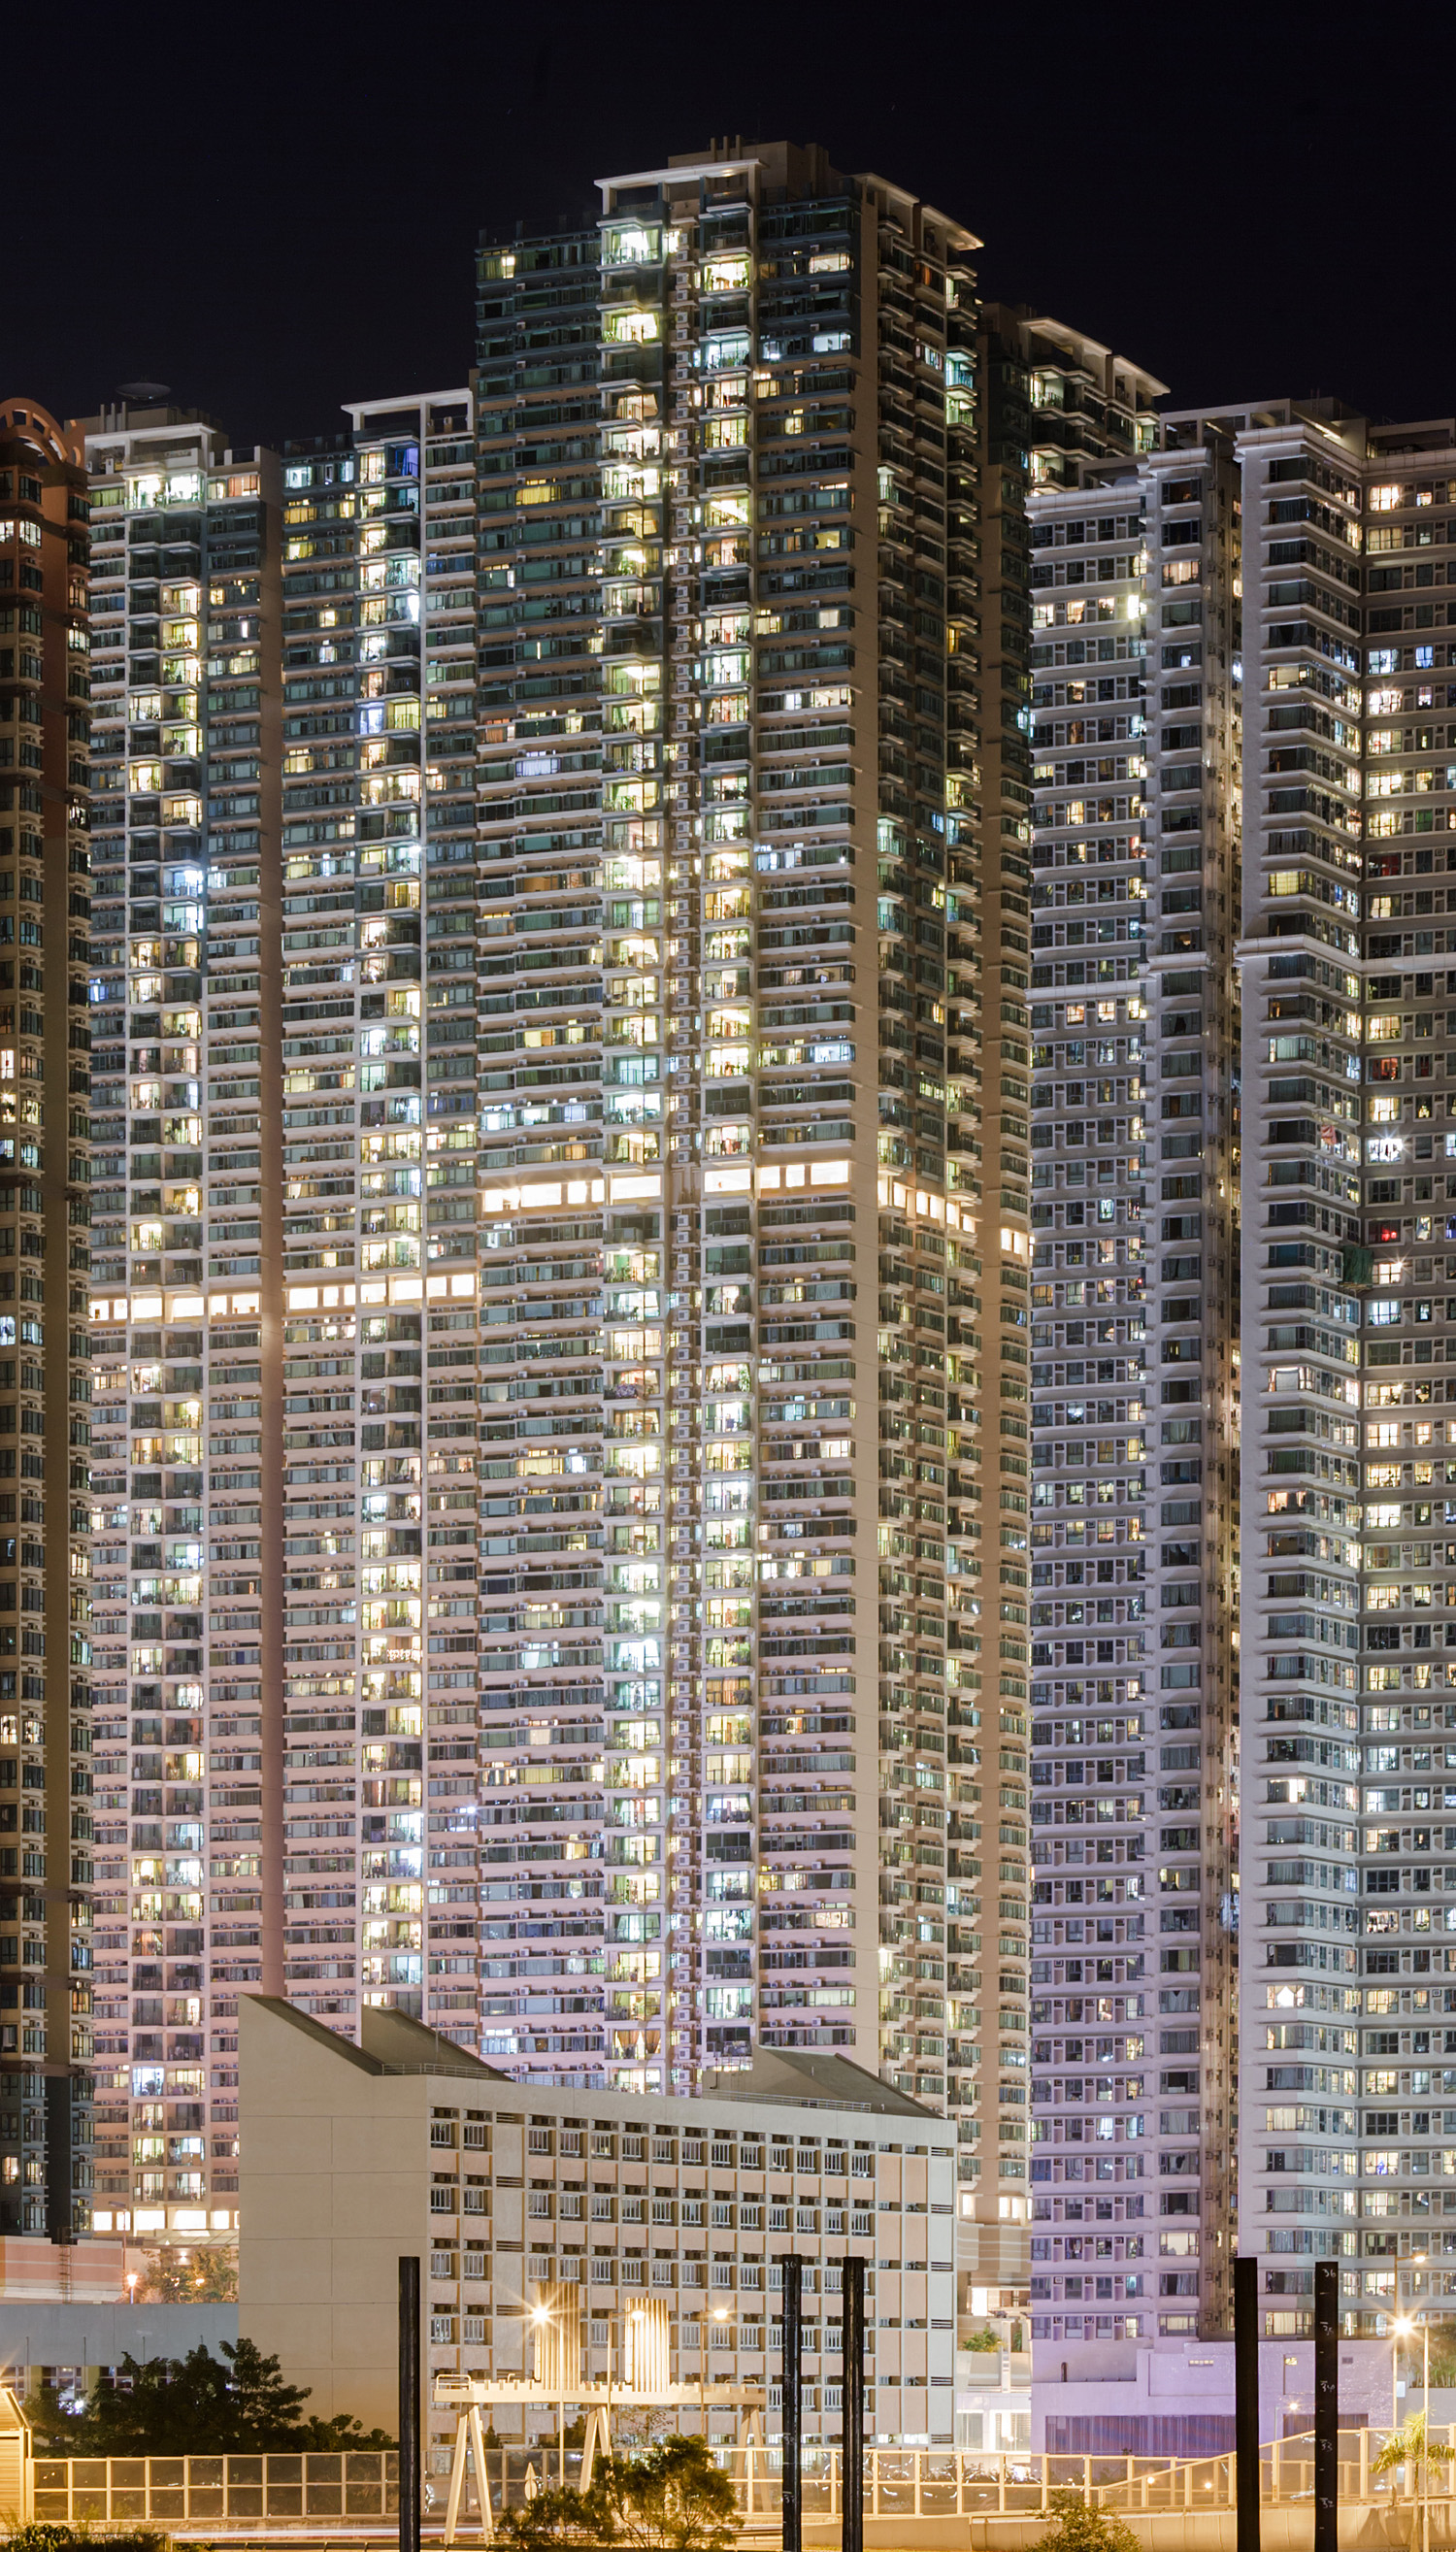 Residence Oasis Tower 7, Hong Kong - View from the south. © Mathias Beinling